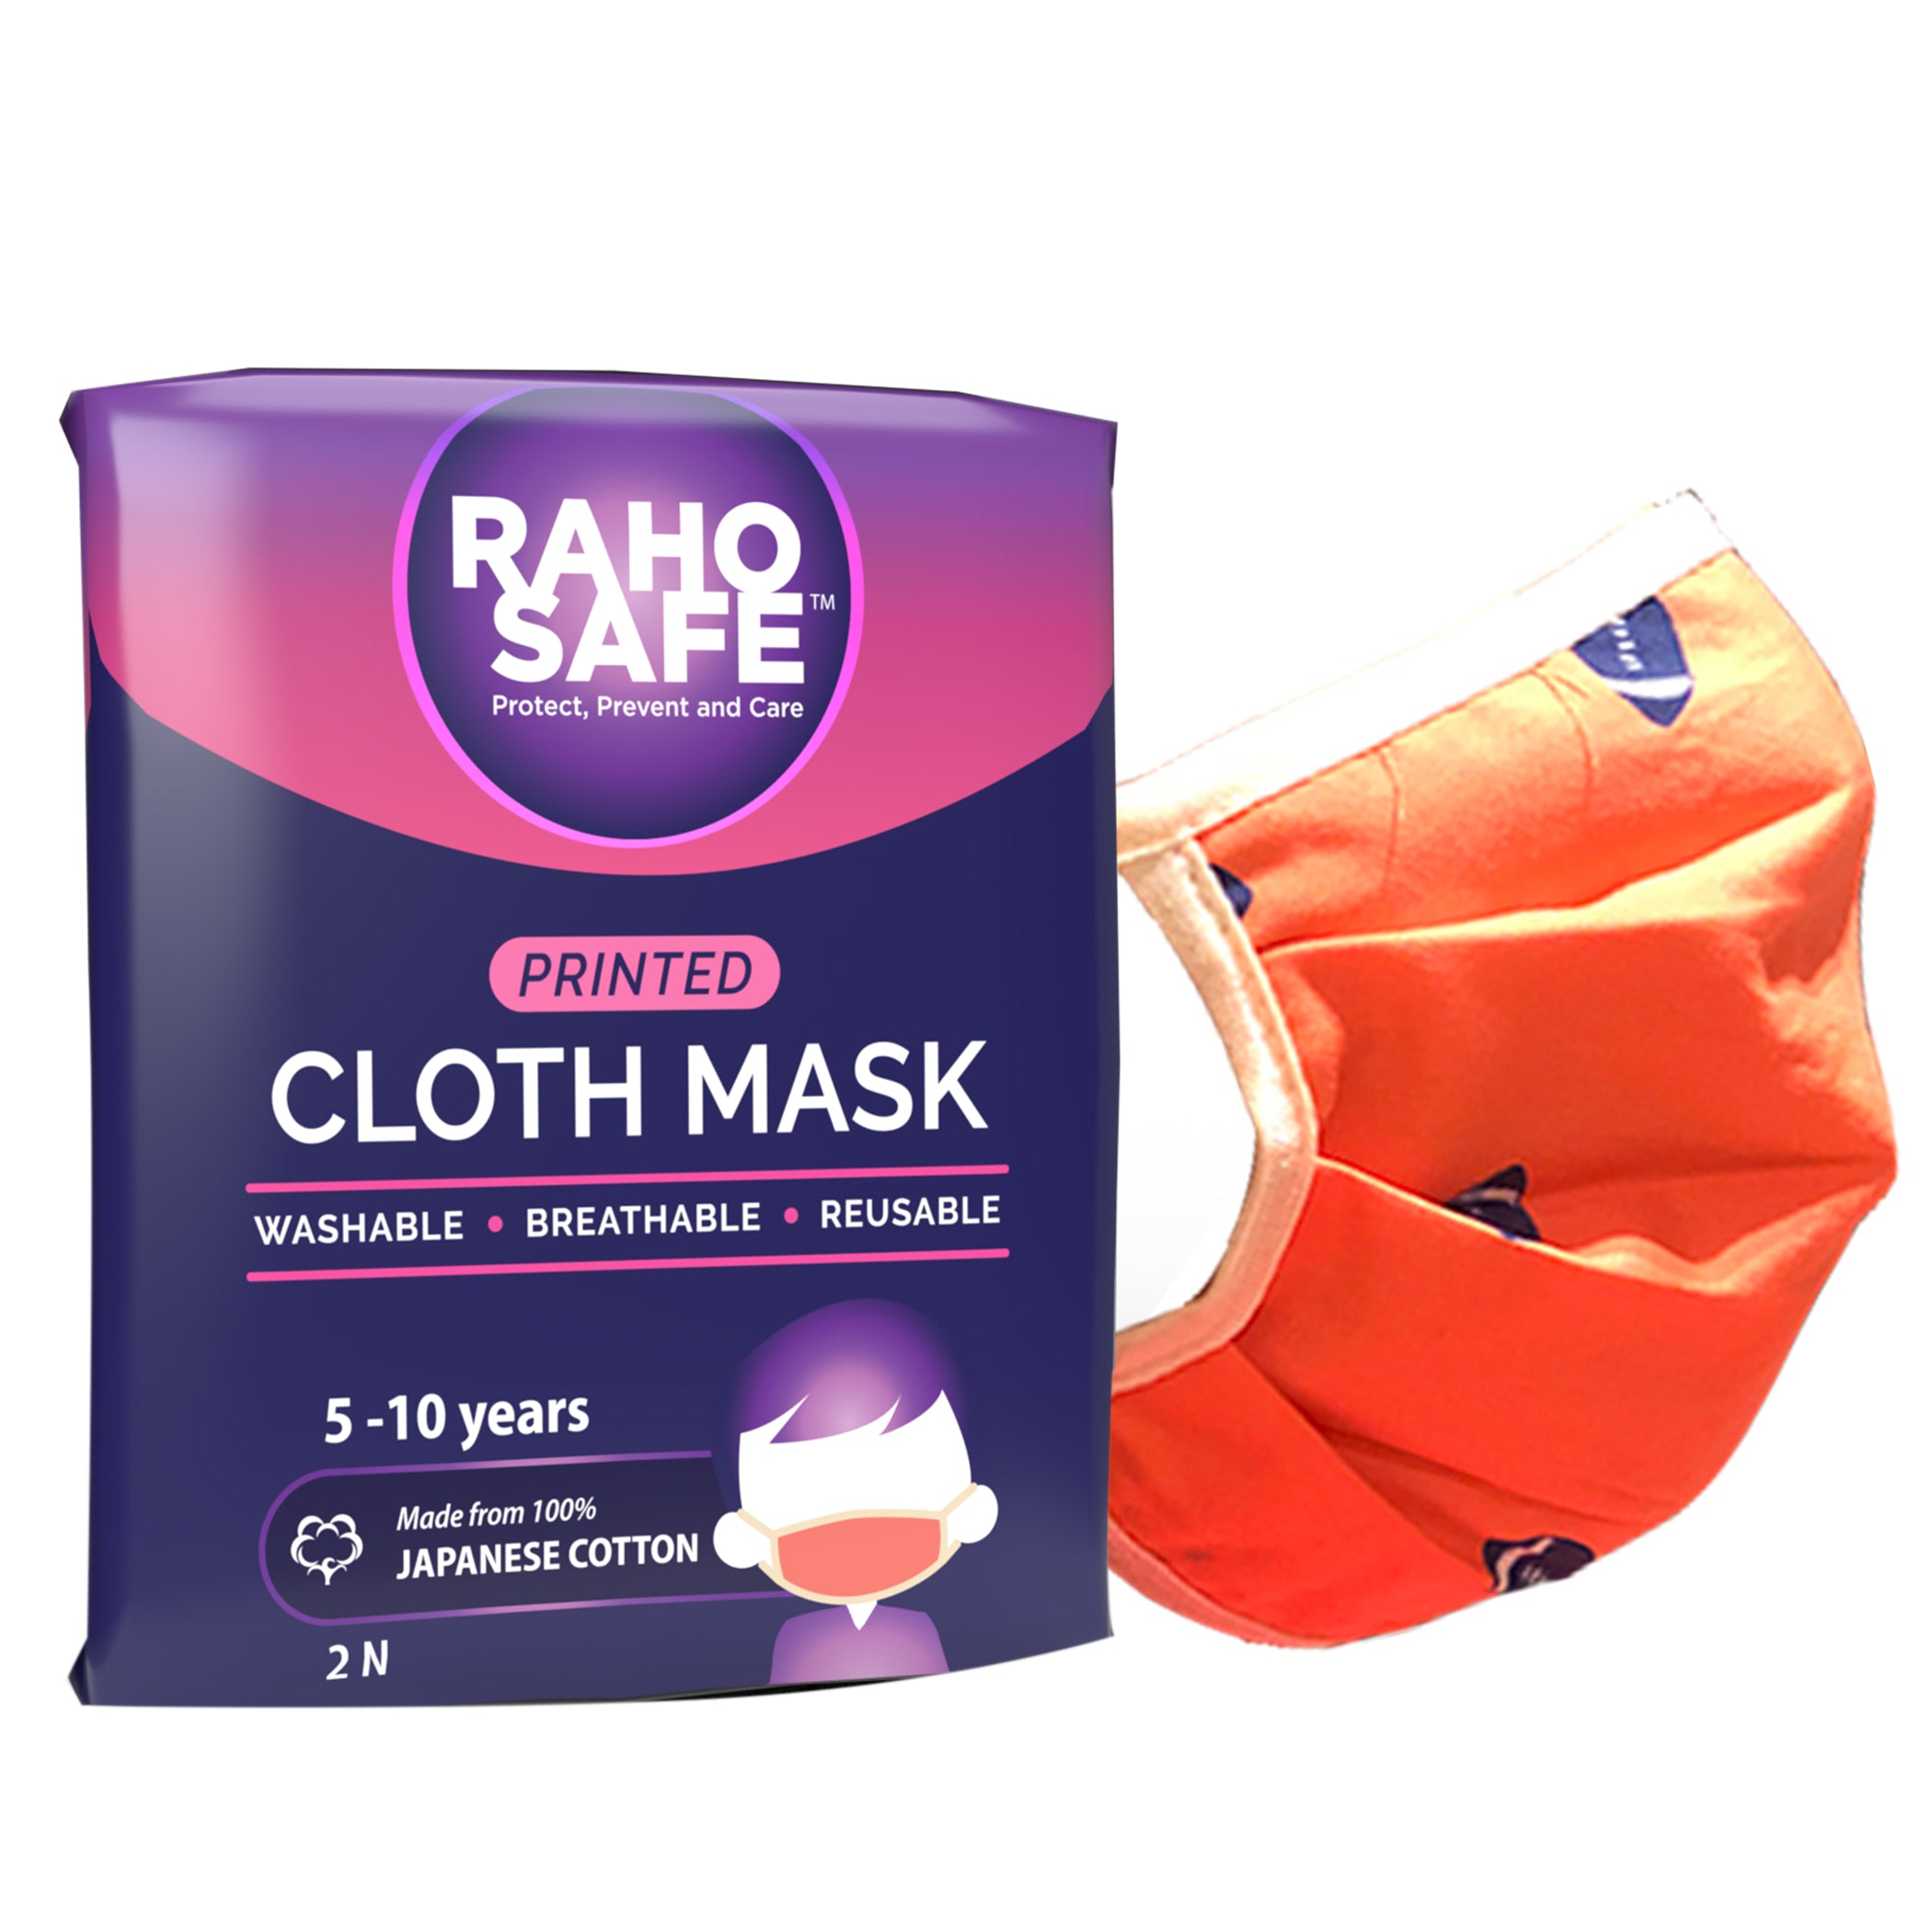 Printed Cloth Mask (Pack of 2) - Small